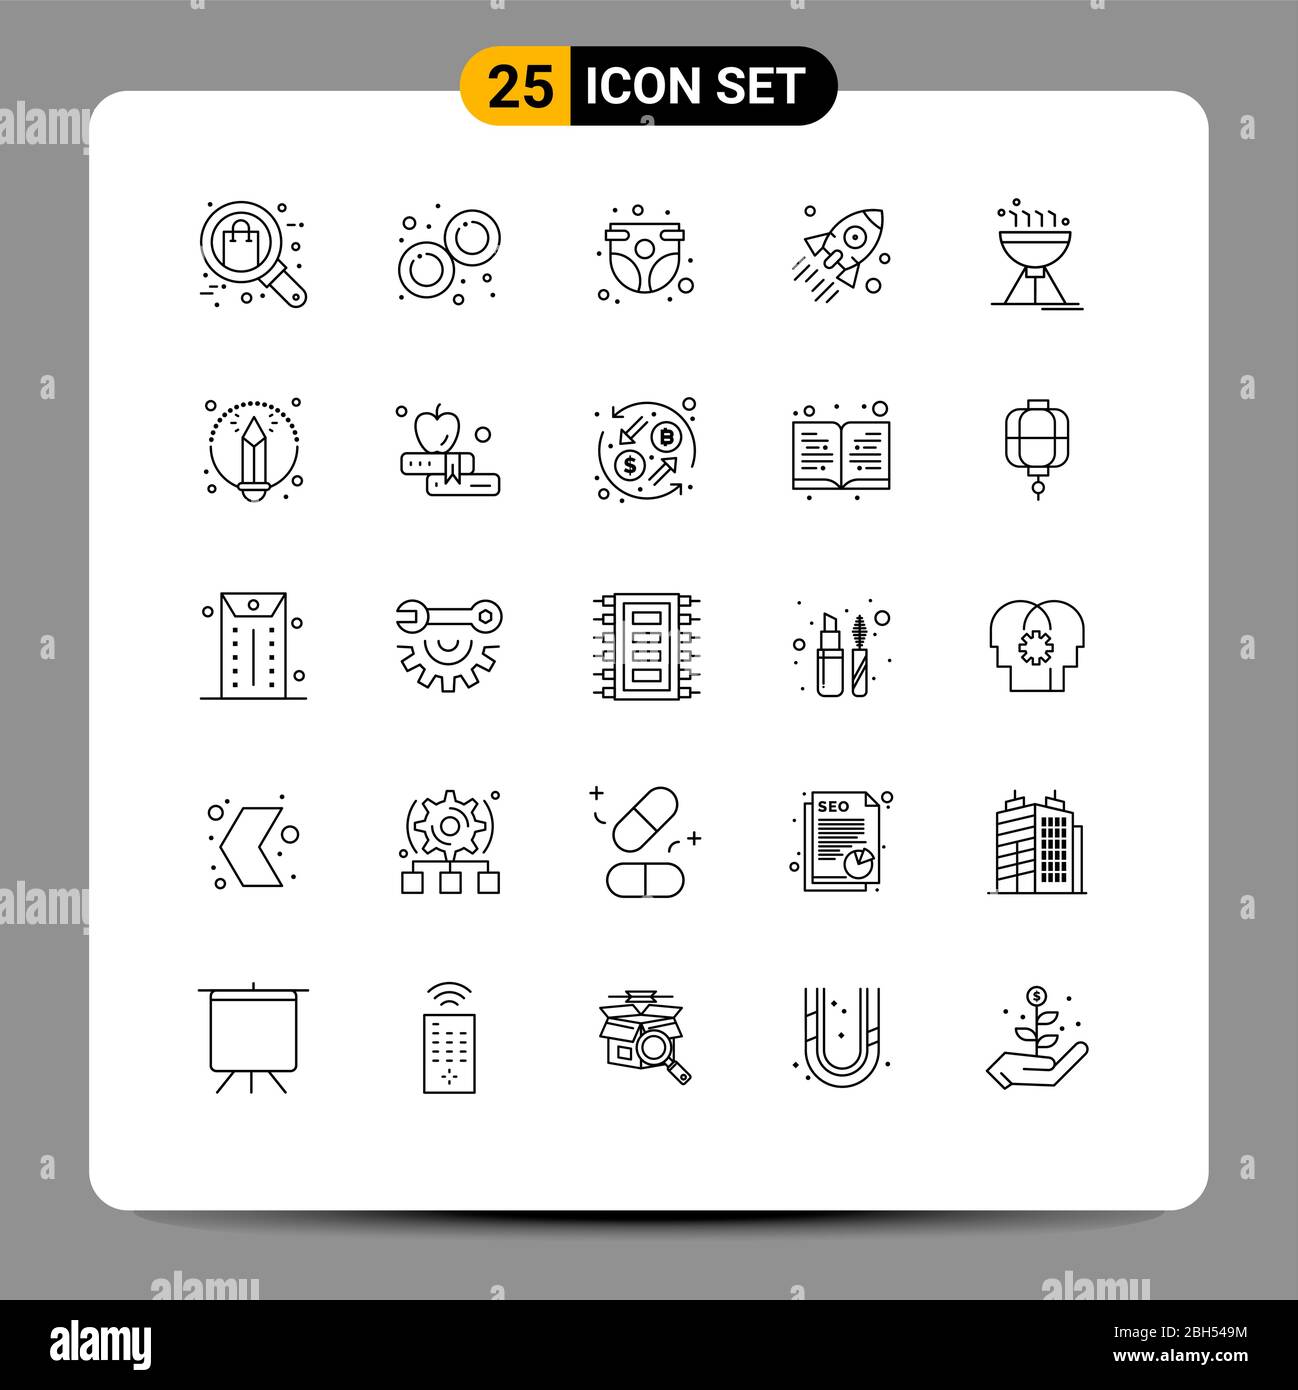 Mobile Interface Line Set of 25 Pictograms of startup, rocket, mitosis, launch, childhood Editable Vector Design Elements Stock Vector